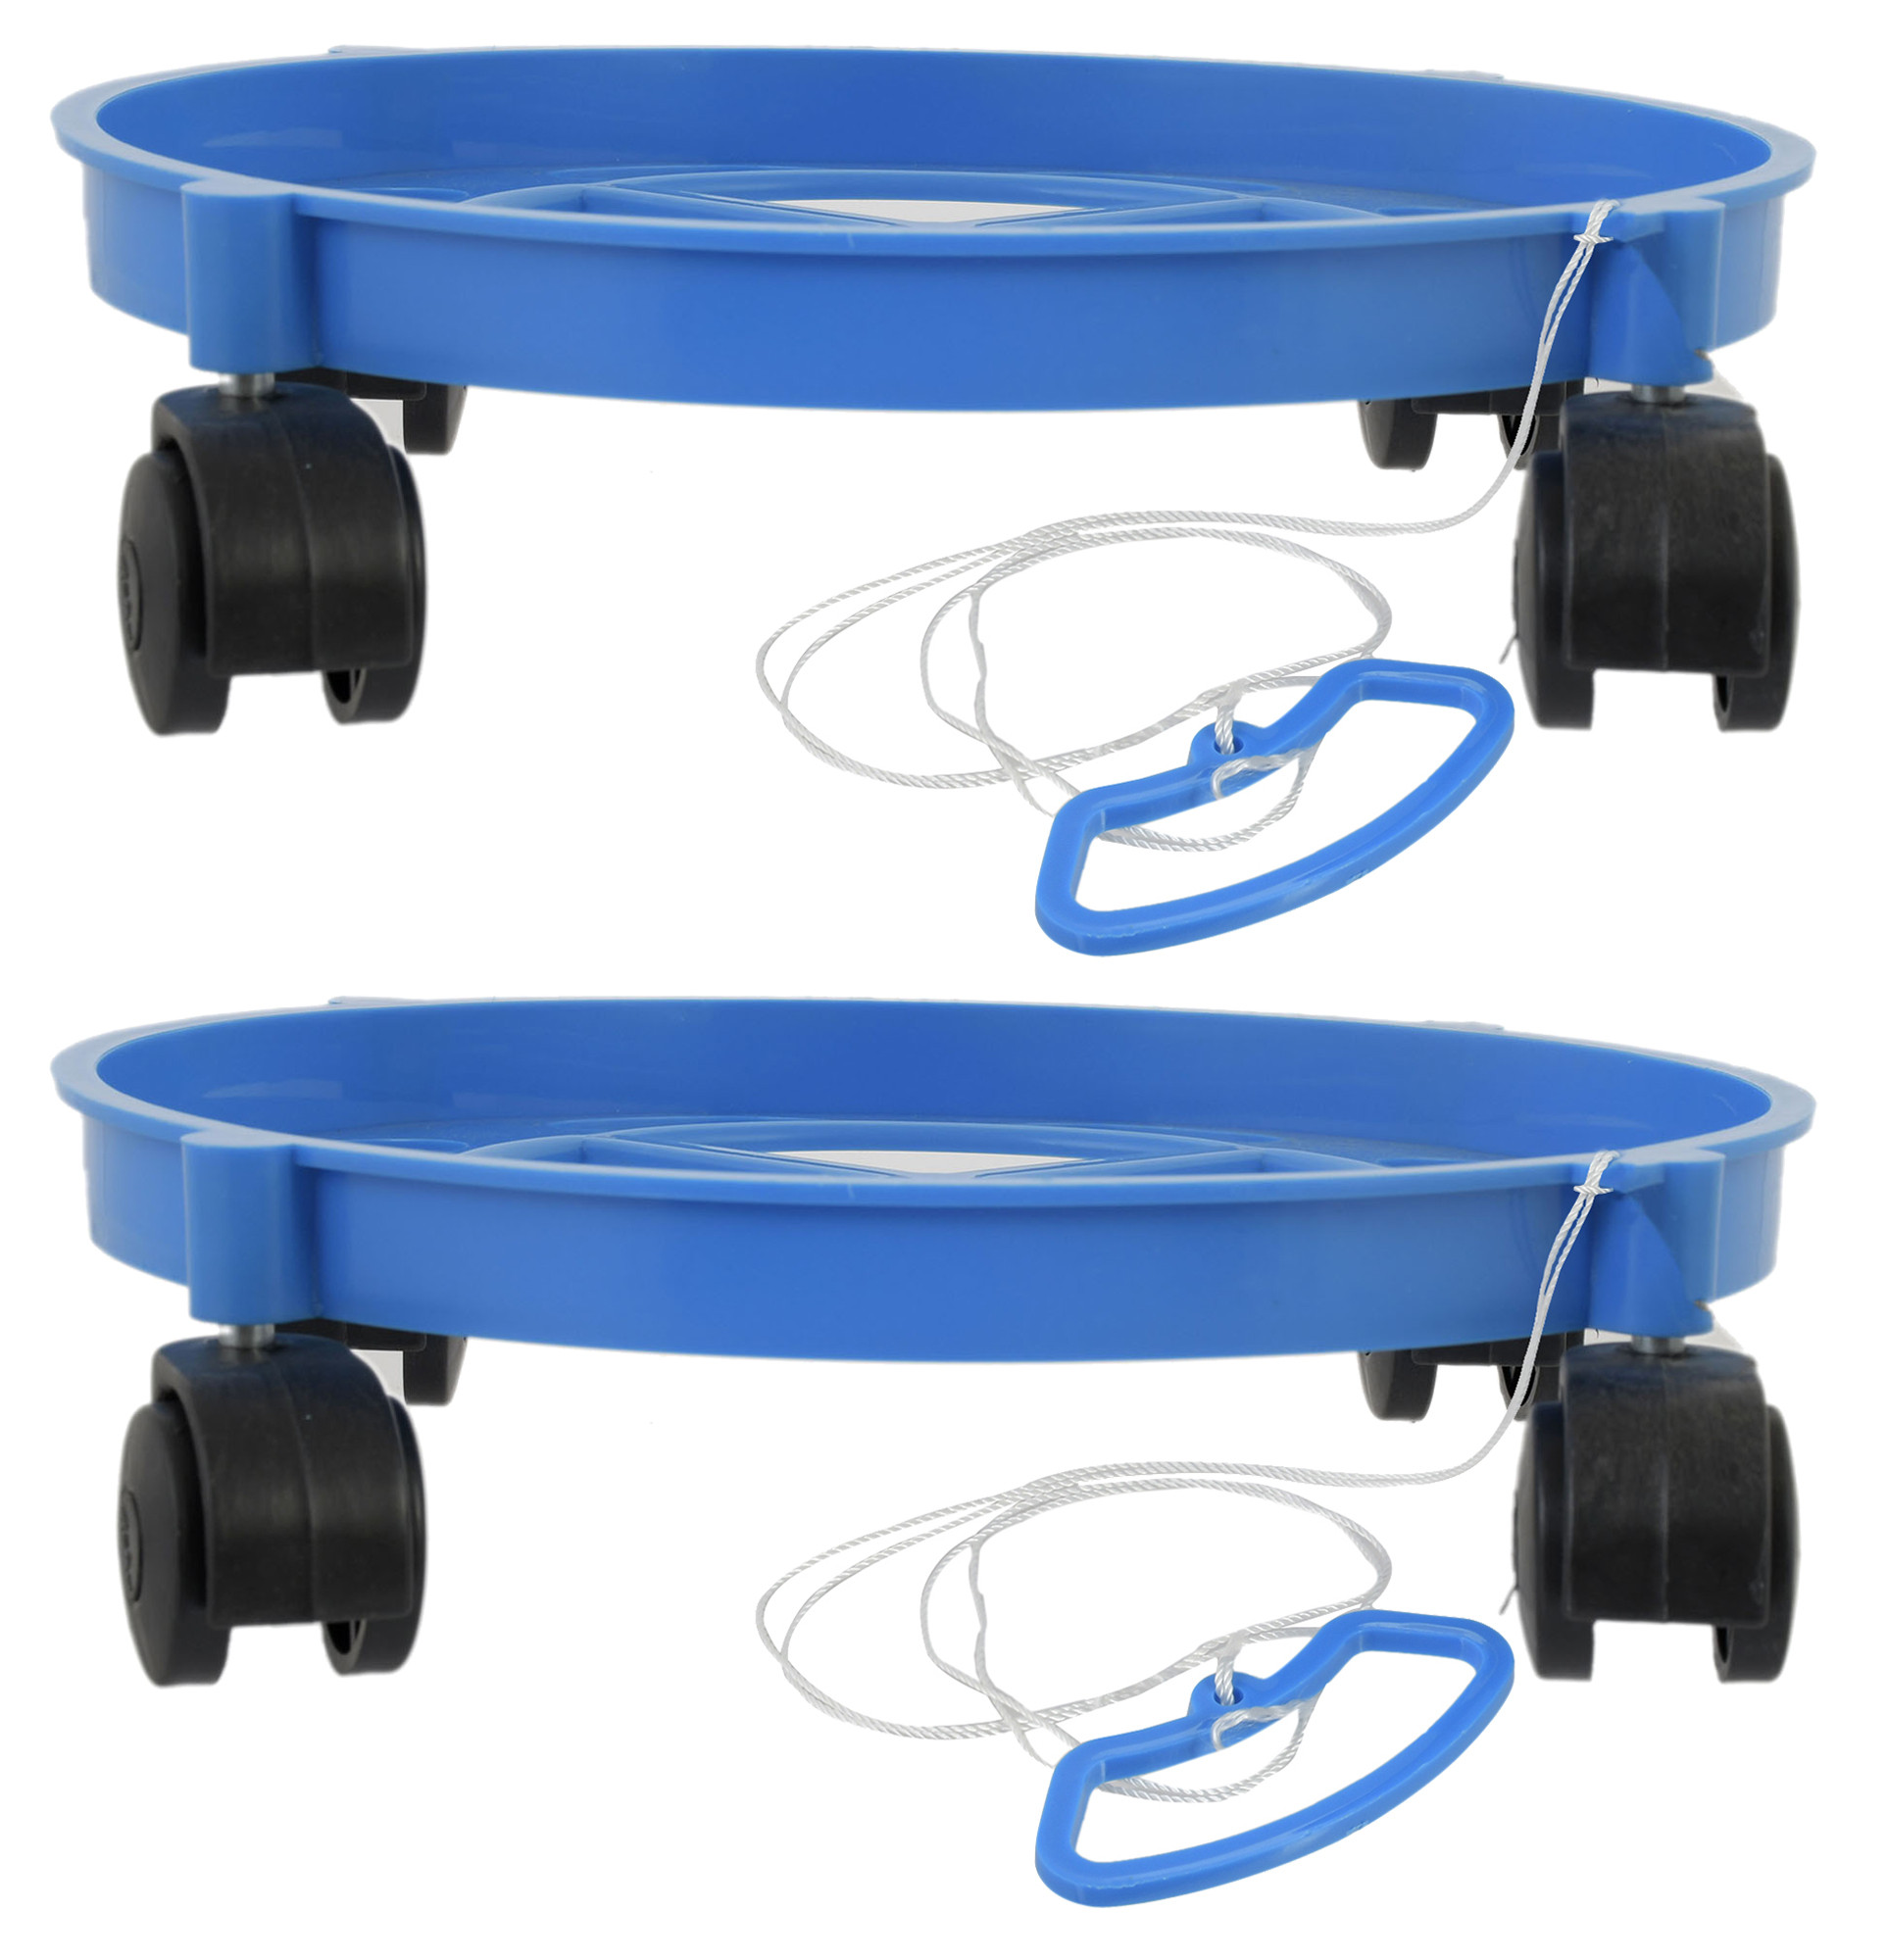 Kuber industries Cylinder Easily Movable Plastic Trolley Stand with Wheels (Blue)